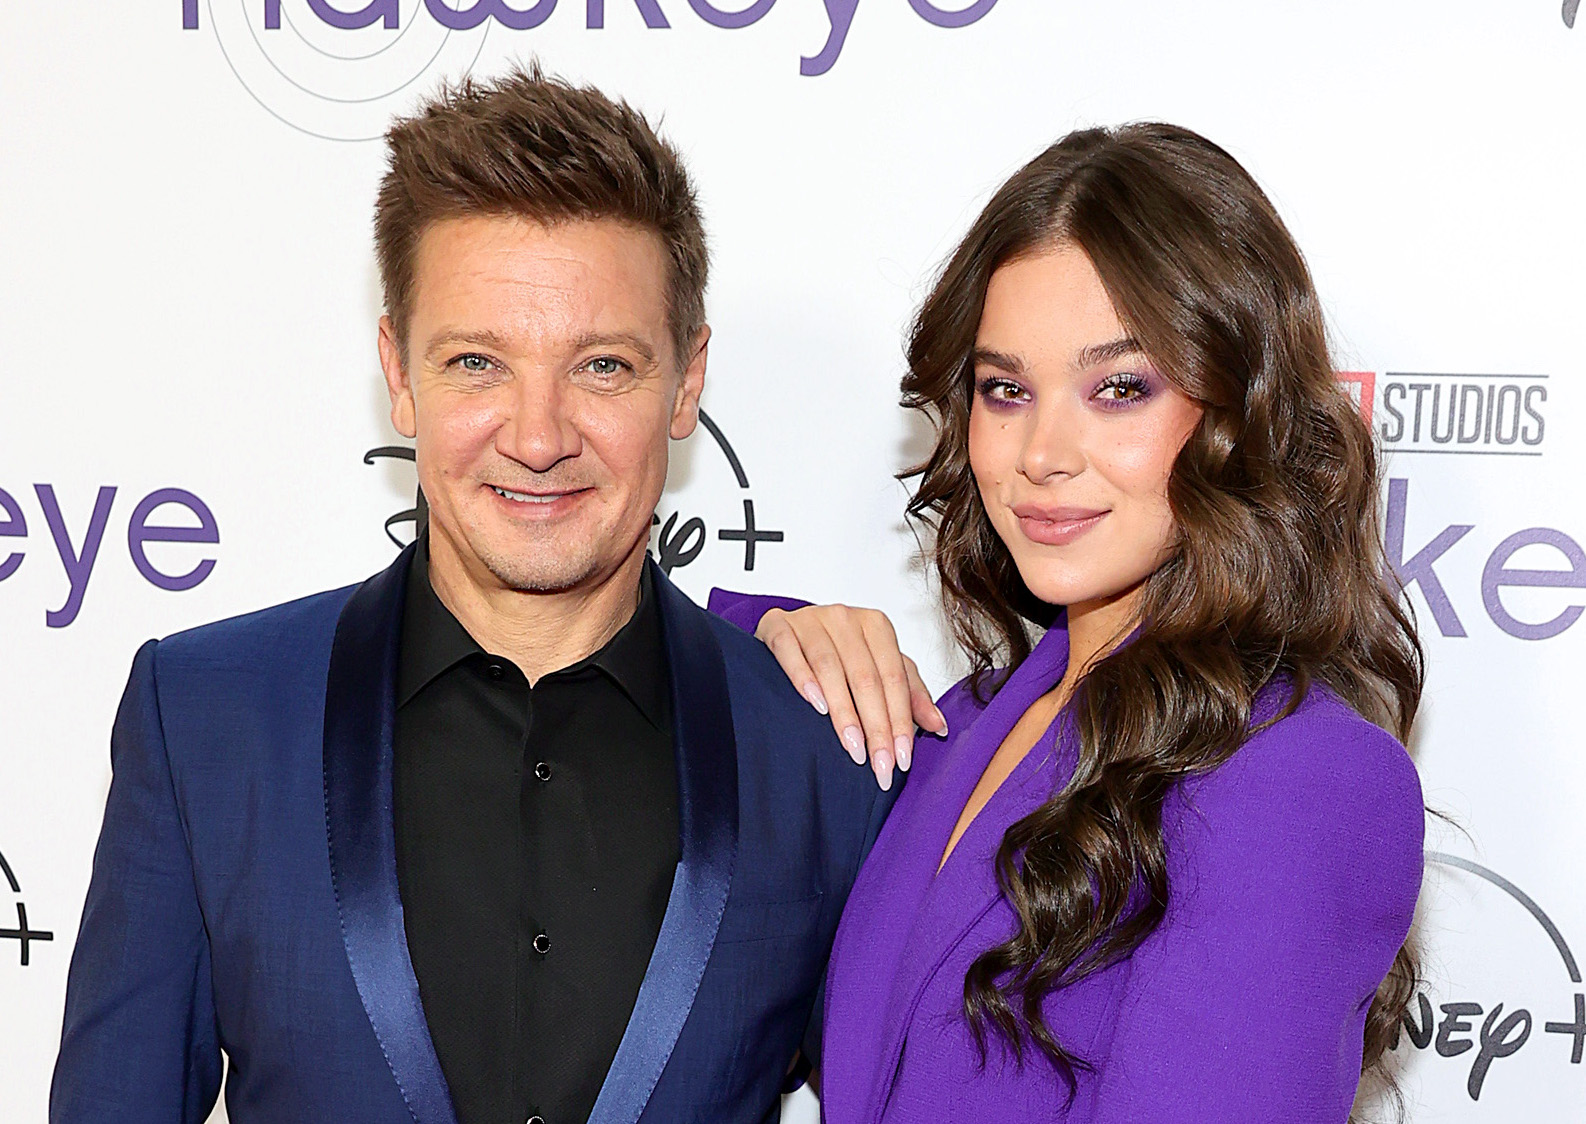 Exclusive: Jeremy Renner & Hailee Steinfeld Talk Disney Plus Action-Comedy “Hawkeye,” Building Enjoyable Chemistry & More!